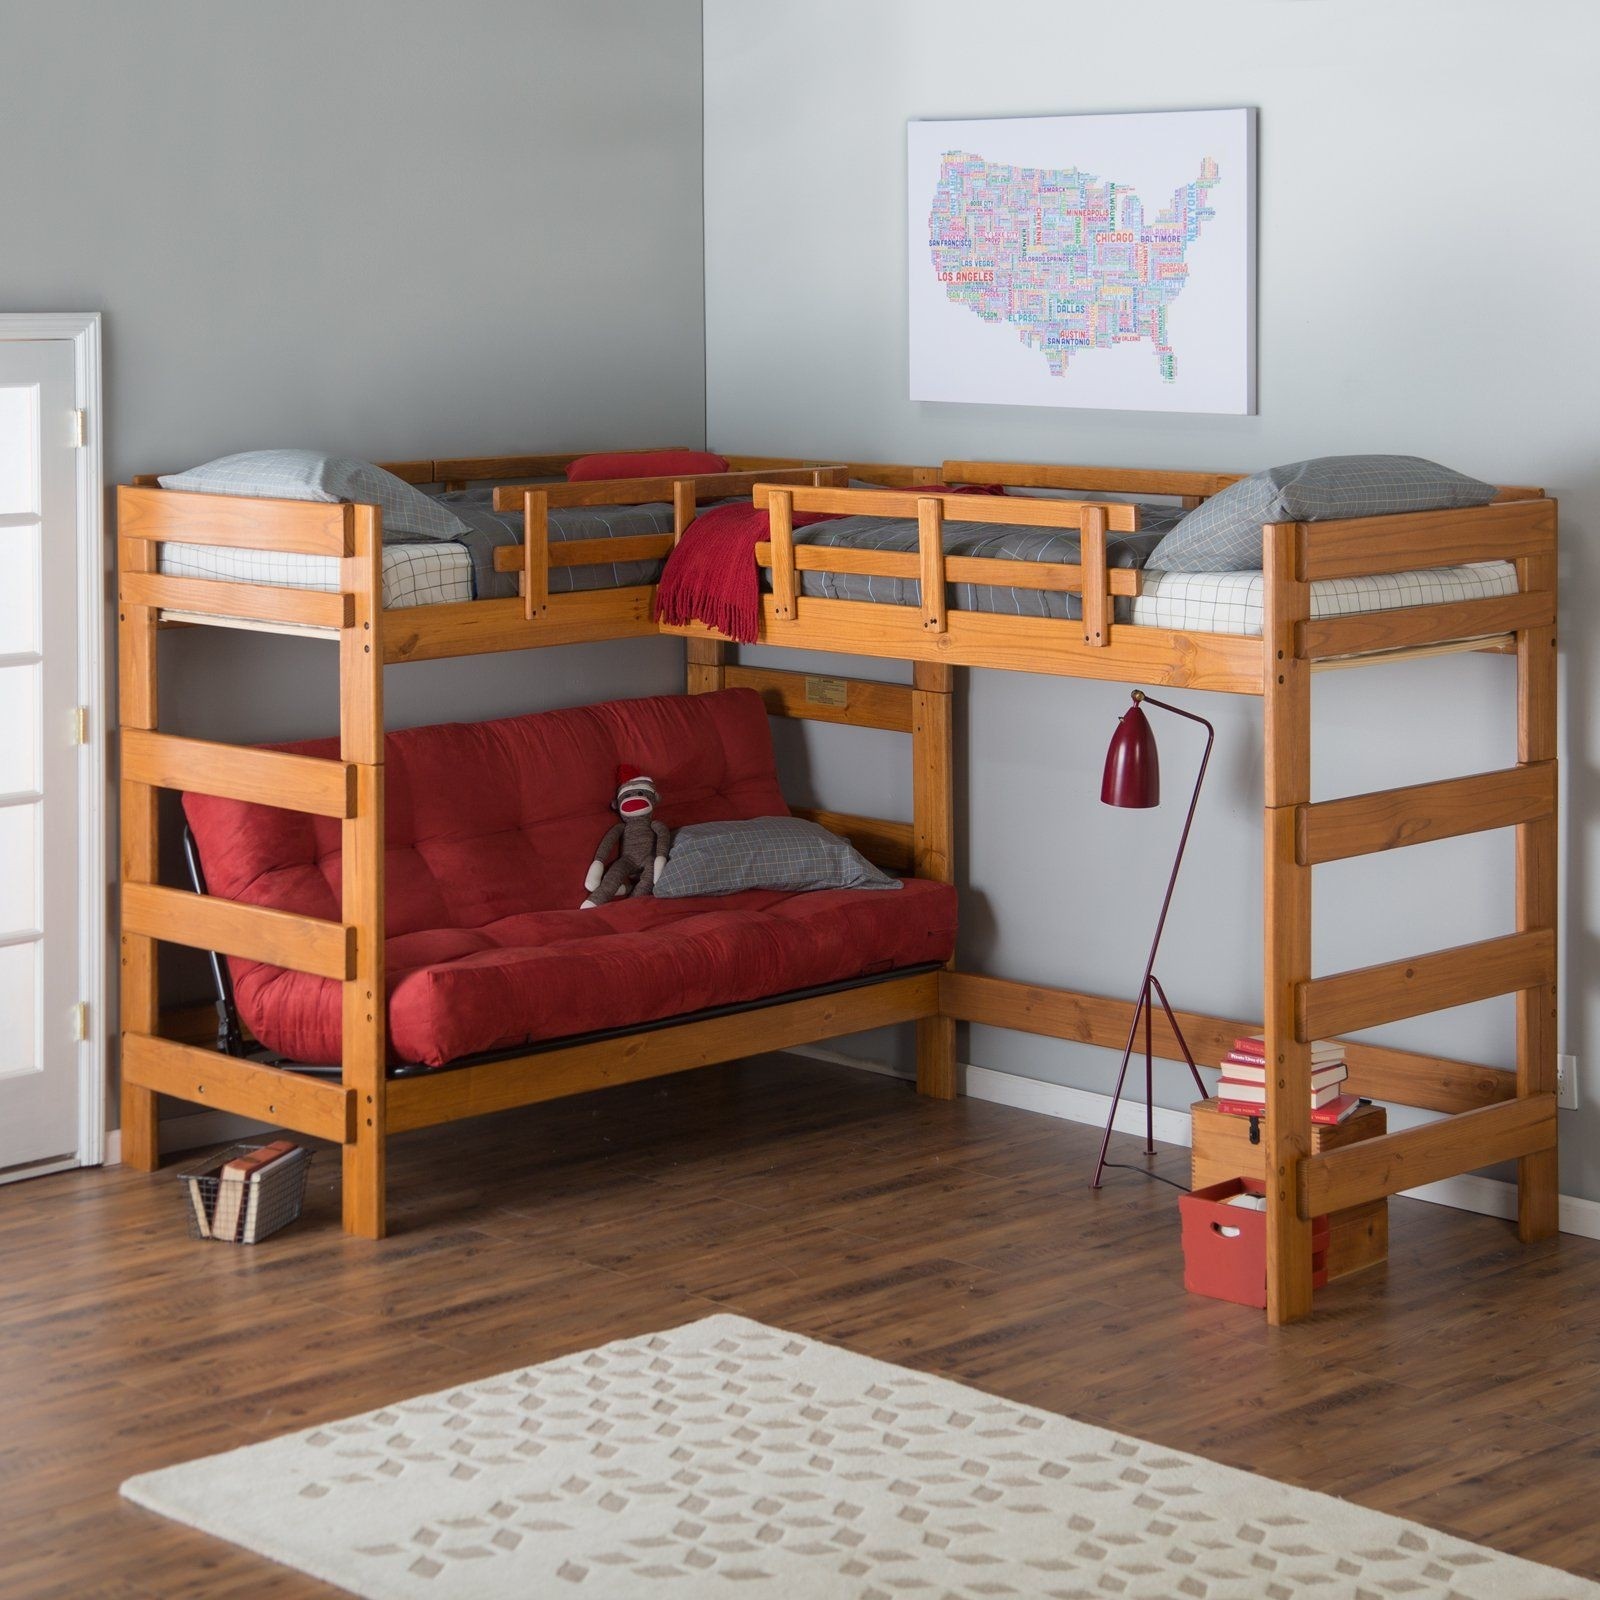 27 interesting l shaped bunk beds design ideas youll